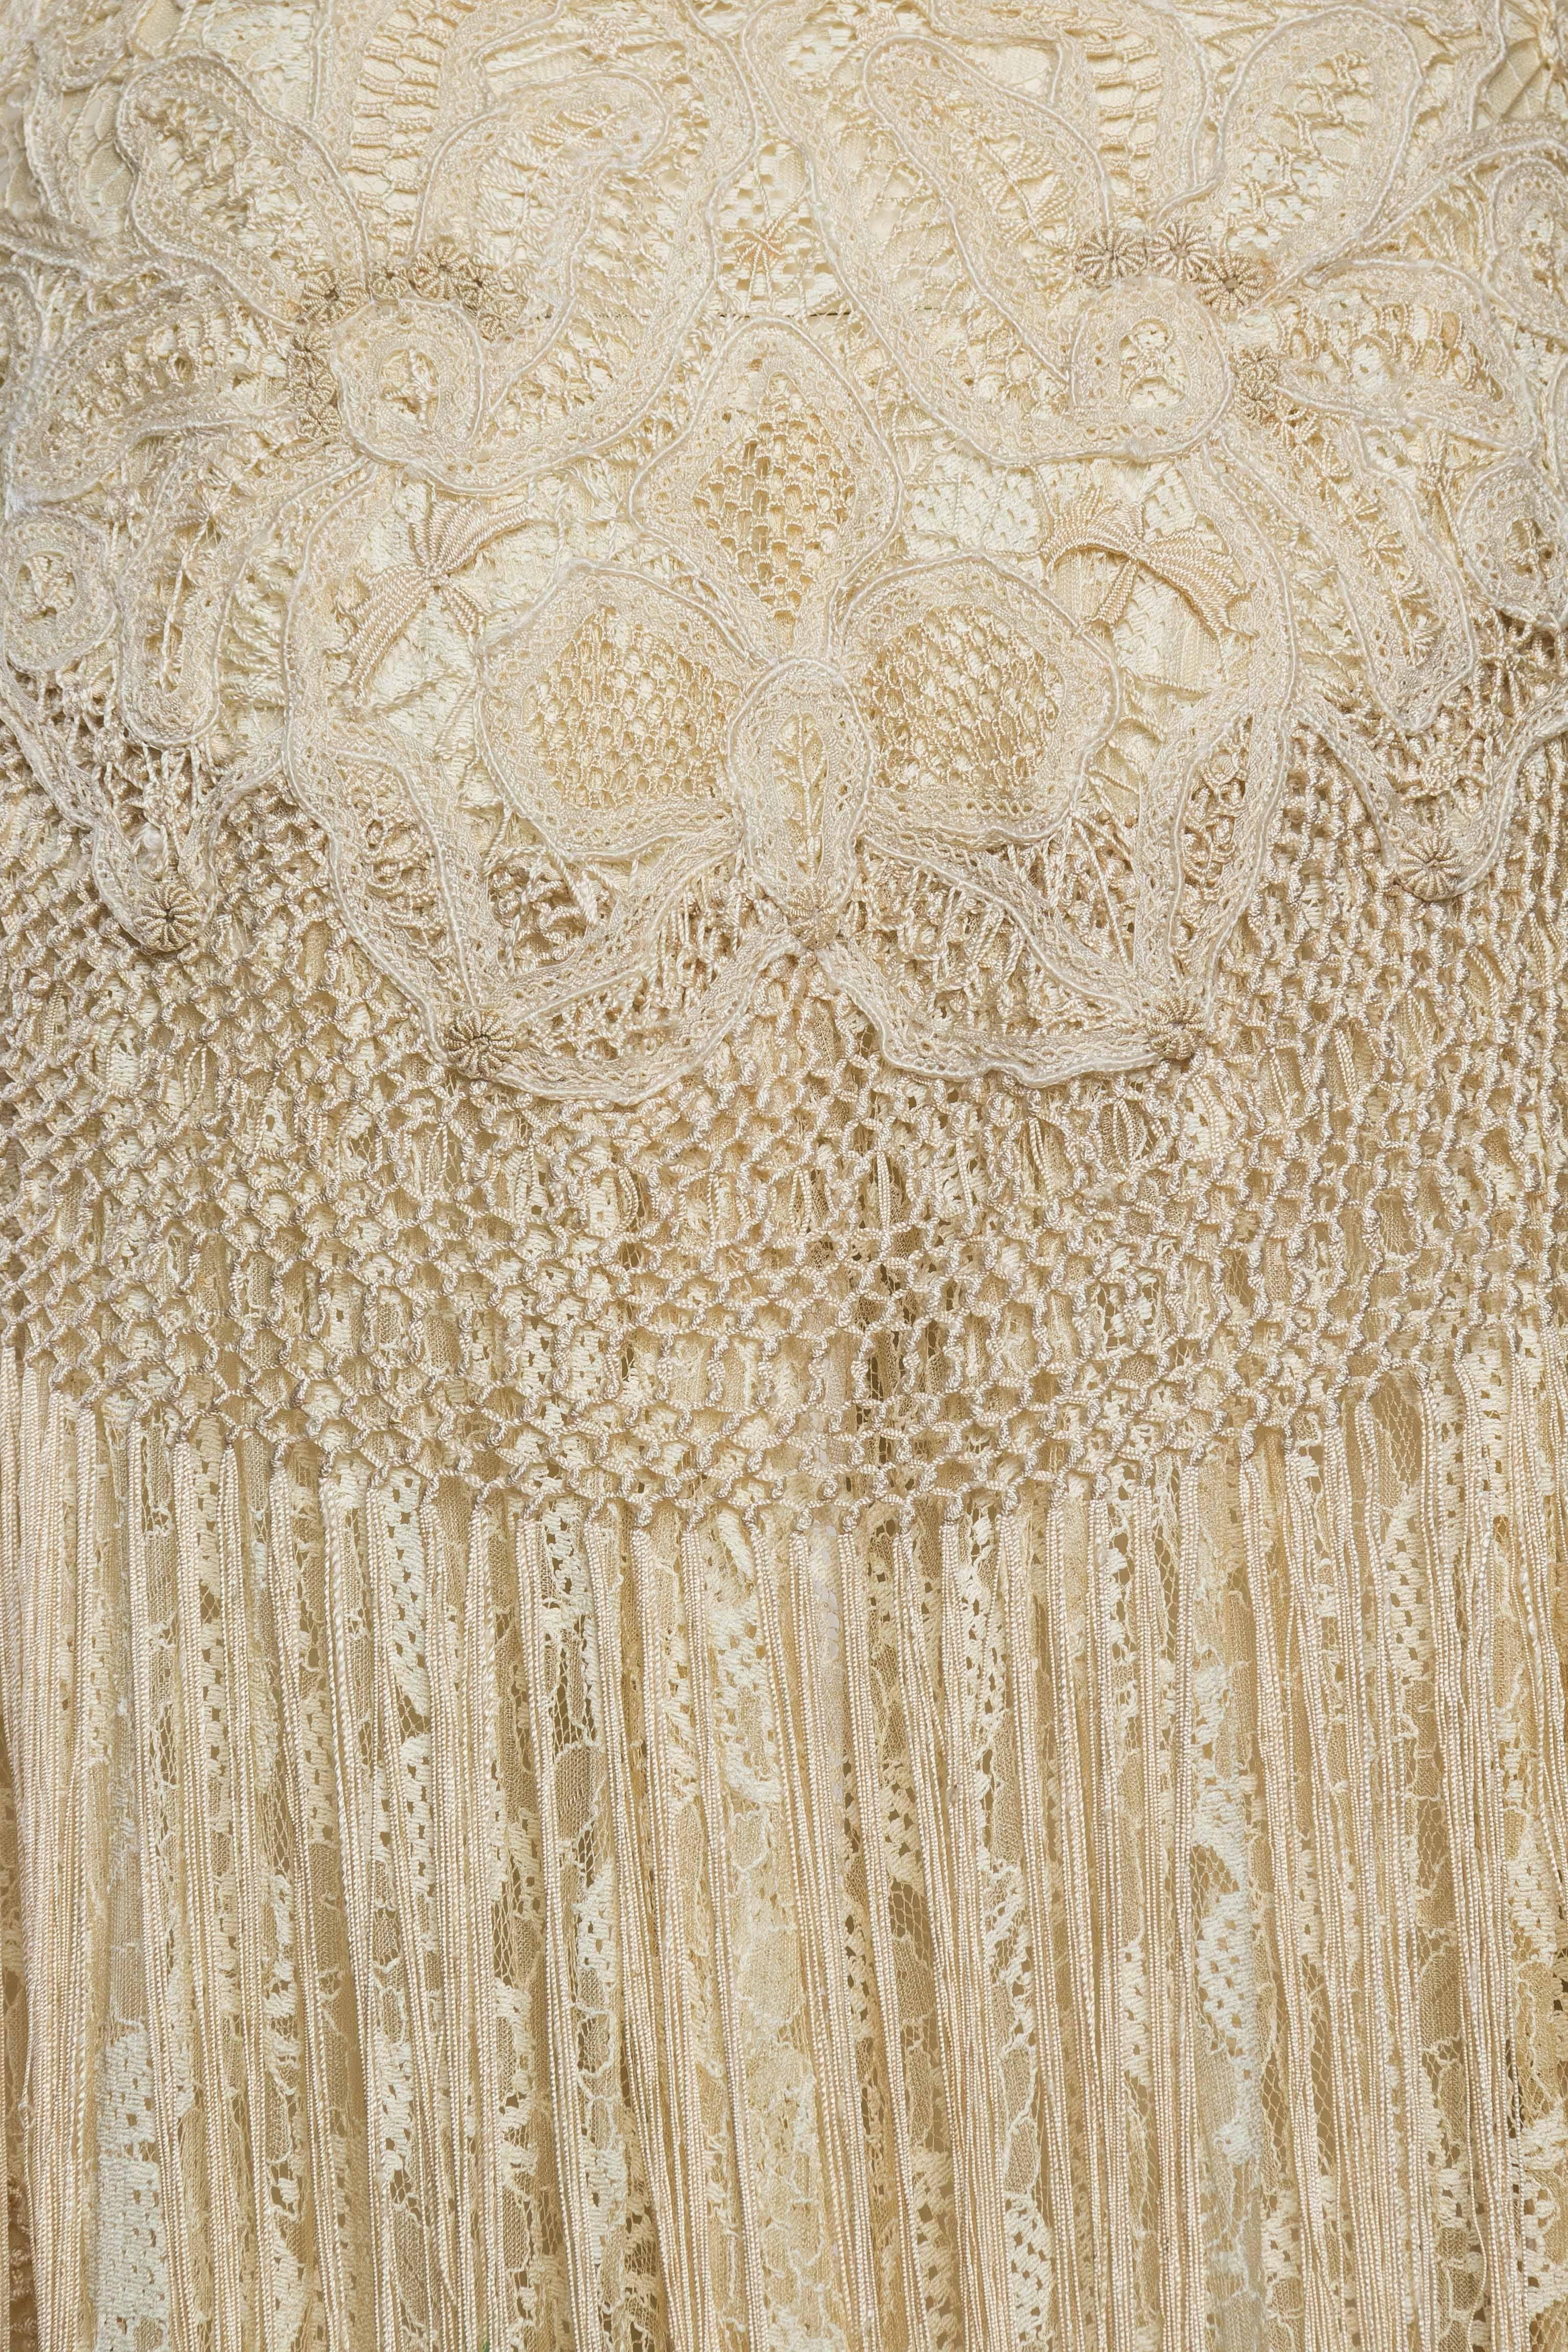 1930s Sheer Silk Lace Gown with Victorian Lace Fringe 3